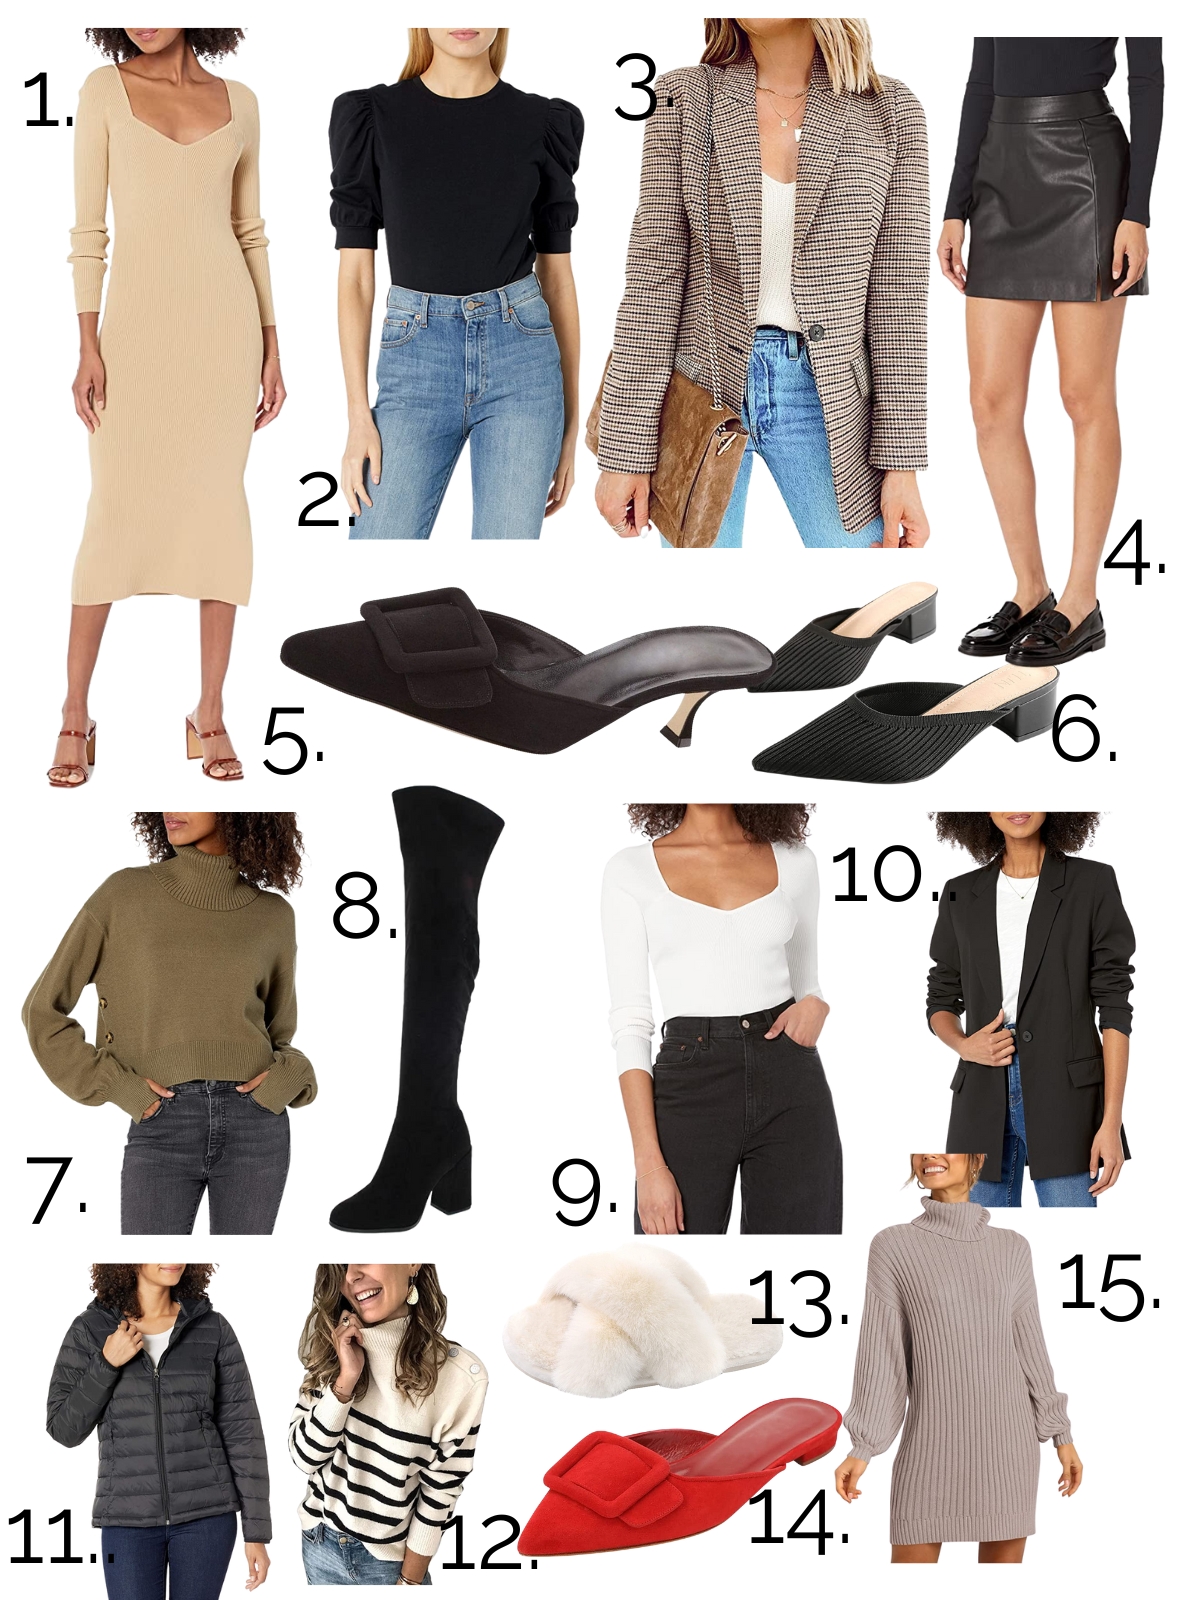 Fashion finds from Amazon pictures of dresses, shoes and sweaters